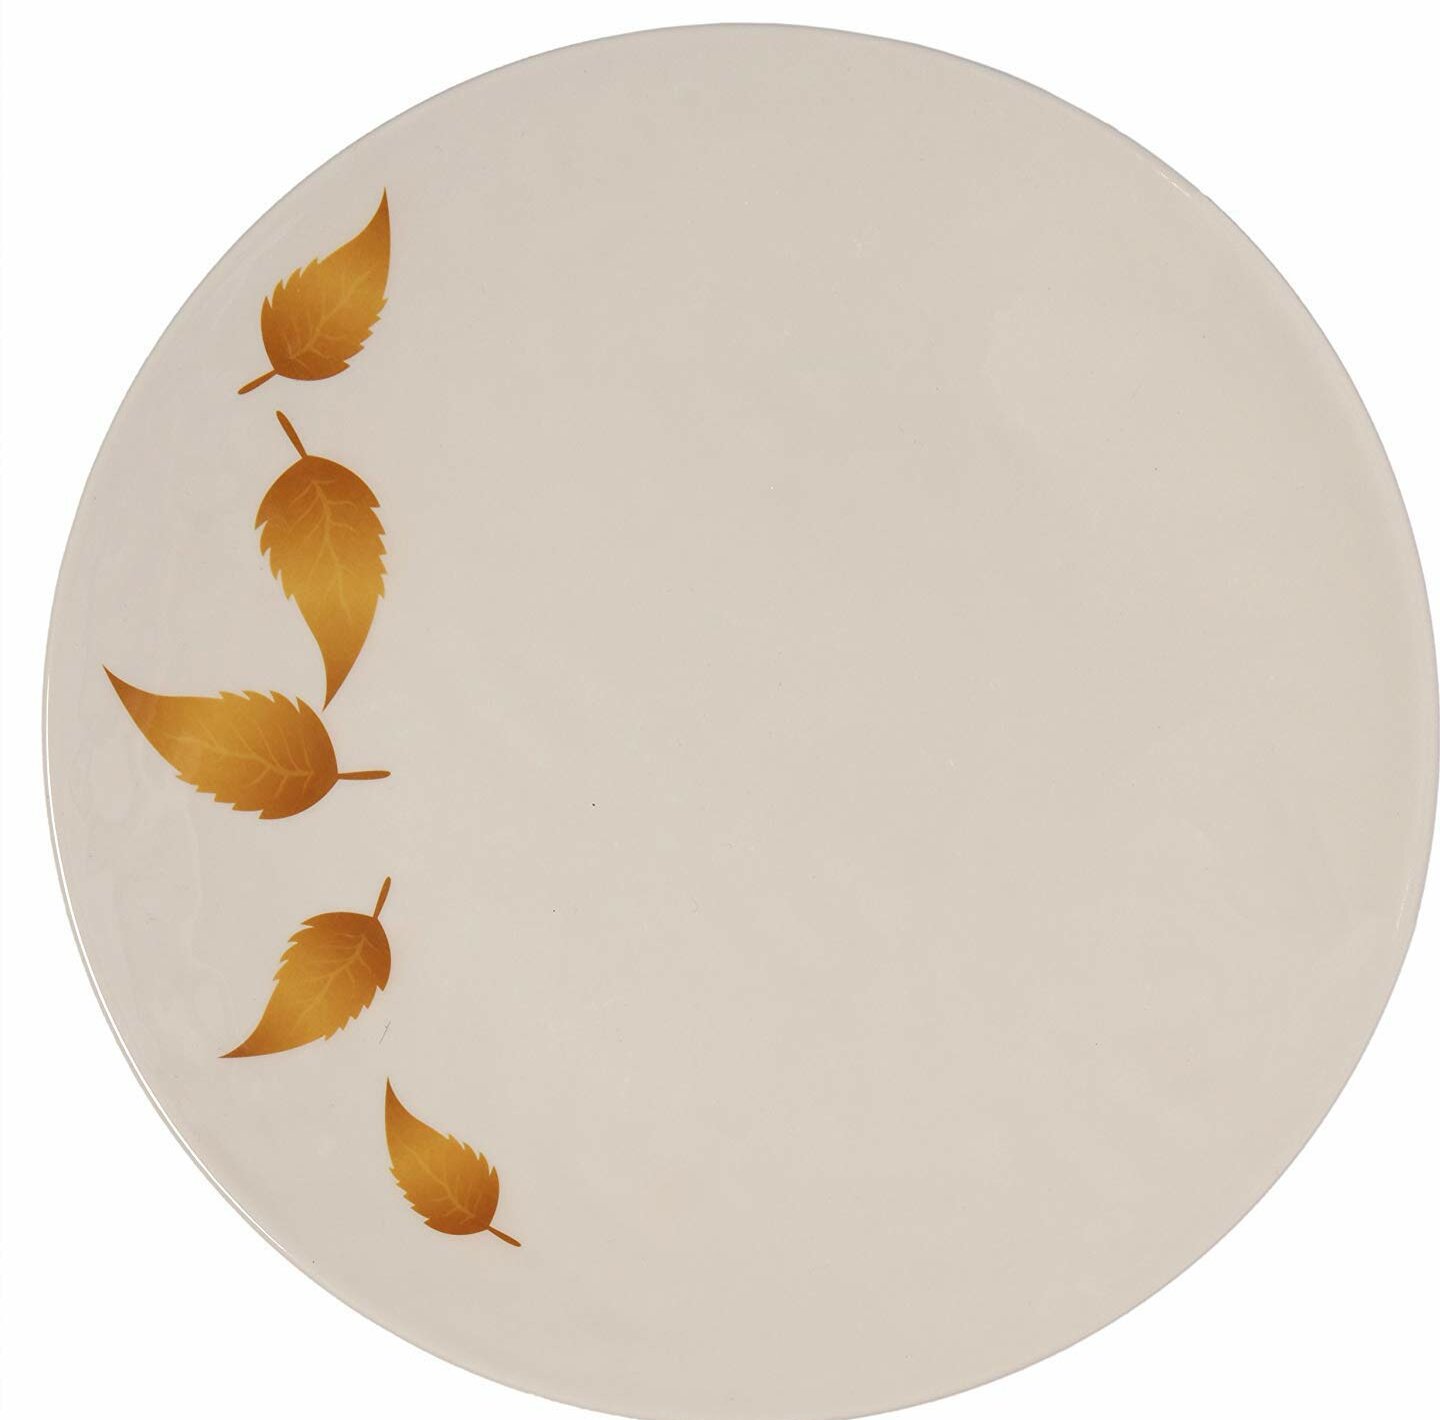 Shatter-Proof and Chip-Resistant Melamine Dinner Plates Ruby Compass Melamine 612409792037 Gold Leaves Collection Melange 6-Piece 100% Melamine Dinner Plate Set 